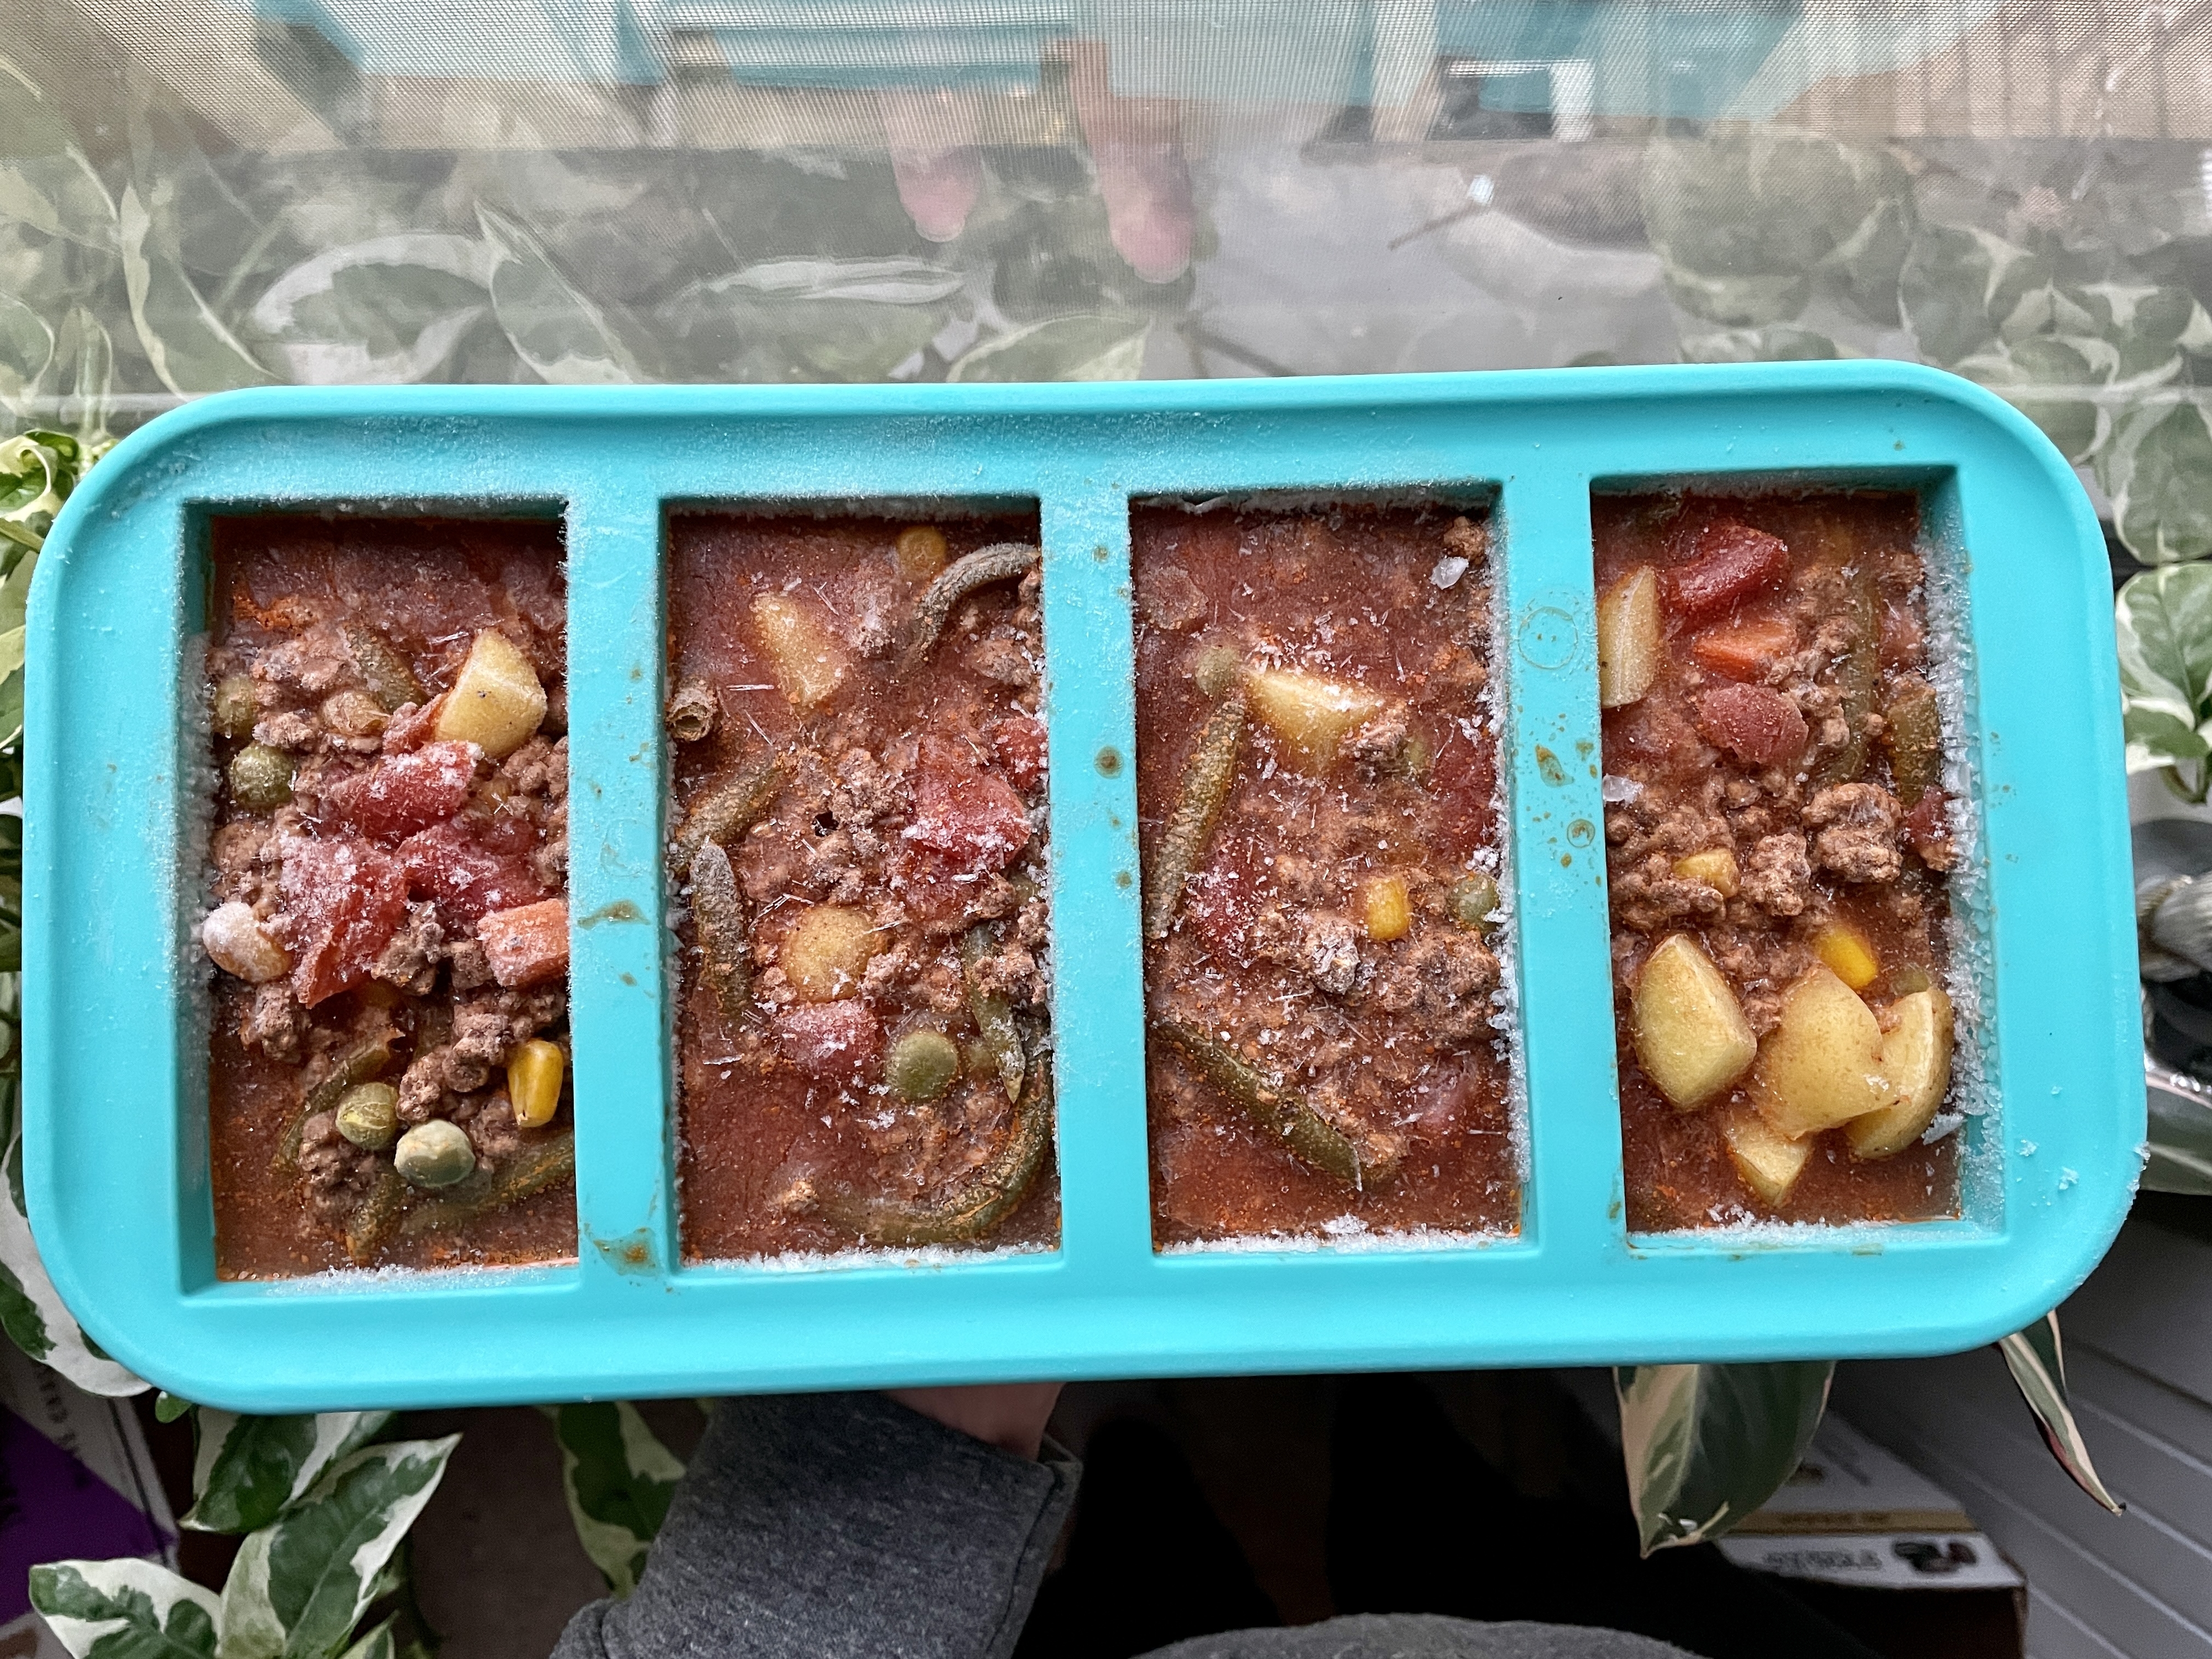 Souper Cubes Review: This Shark Tank Product Freezes Food in Perfect  Portions — The Keto Minimalist